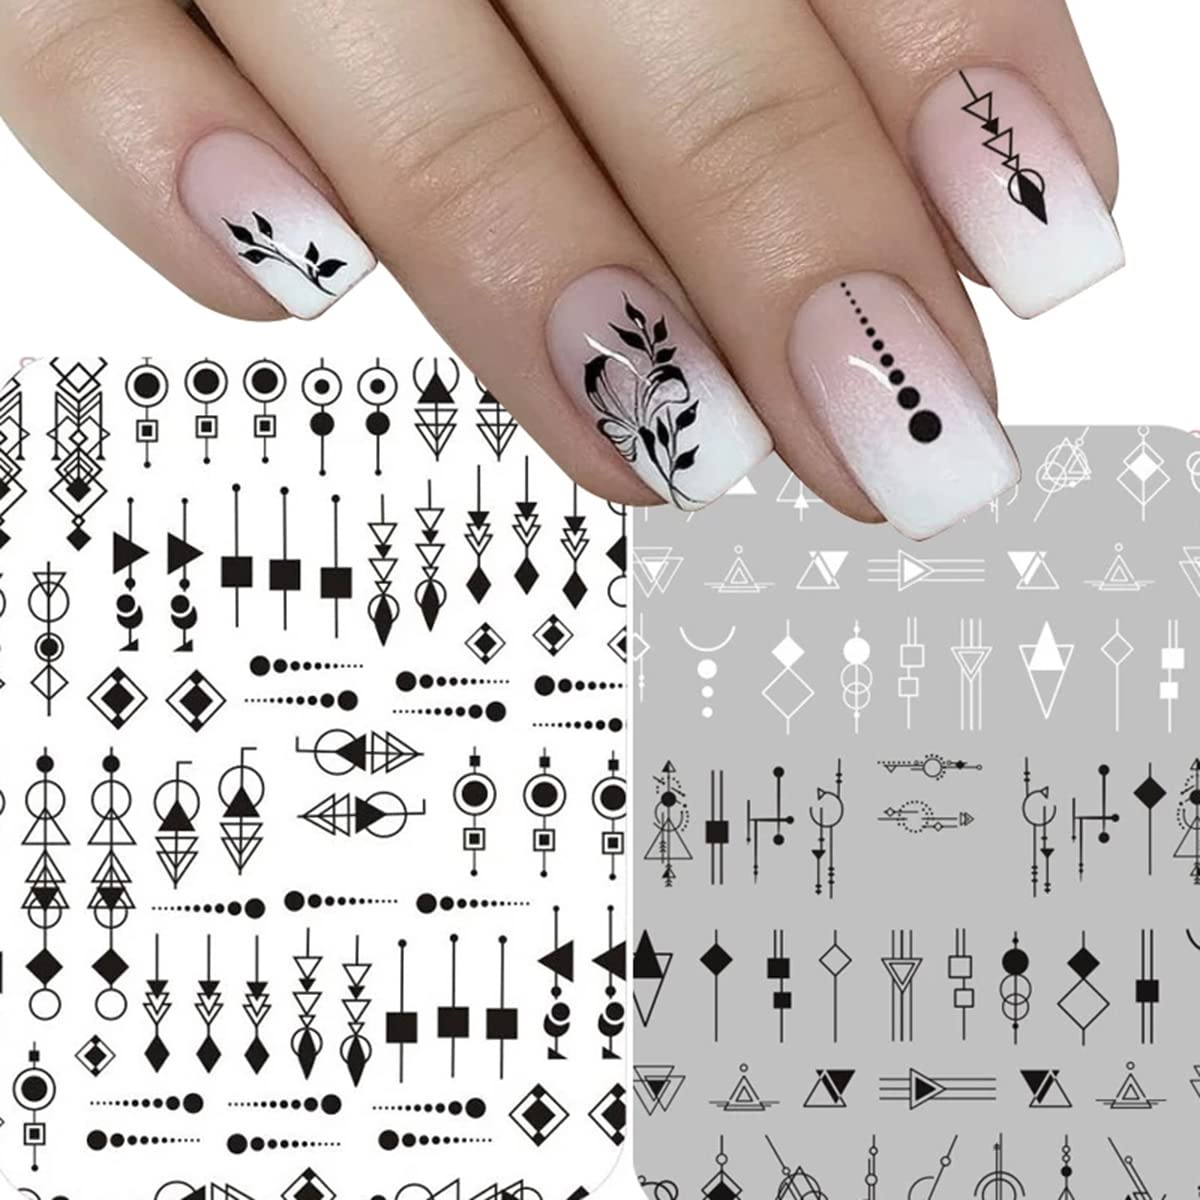 2pcs Black and White Alphabet Nail Letter Stickers Stickers 3d Nail Art  Sticker Nail Decal Stamping Nail Art Decoration Transfer Decals